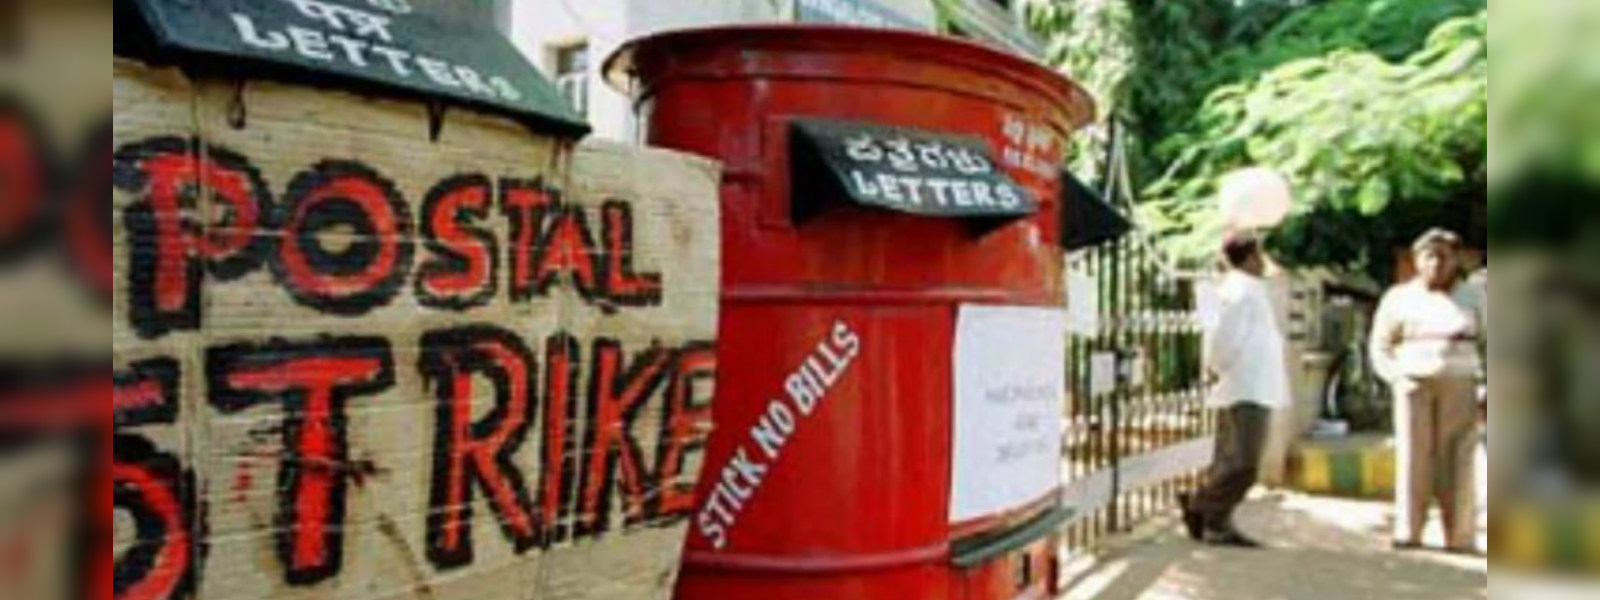 Postal workers on sick leave;public inconvenienced